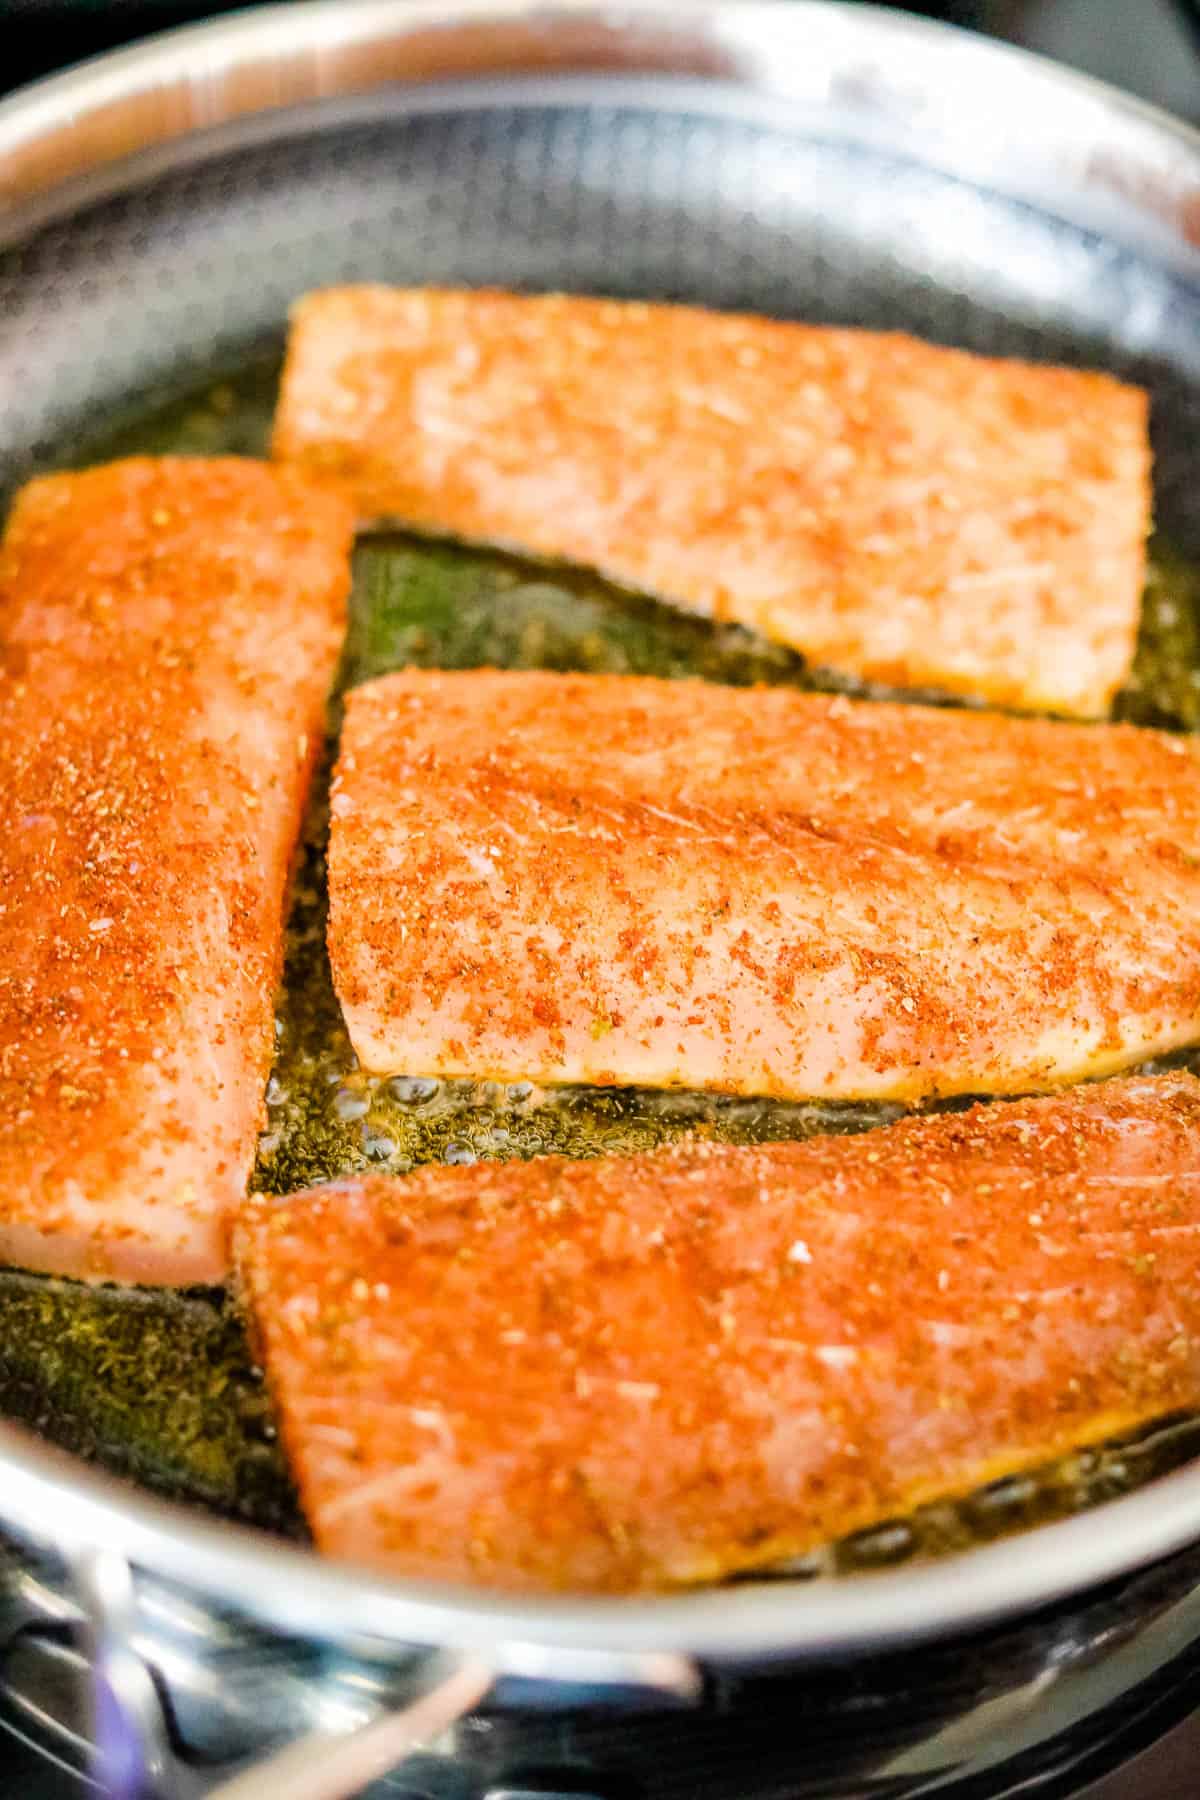 Salmon fillets being cooked in a frying pan, inspired by blackened Mahi Mahi tacos.